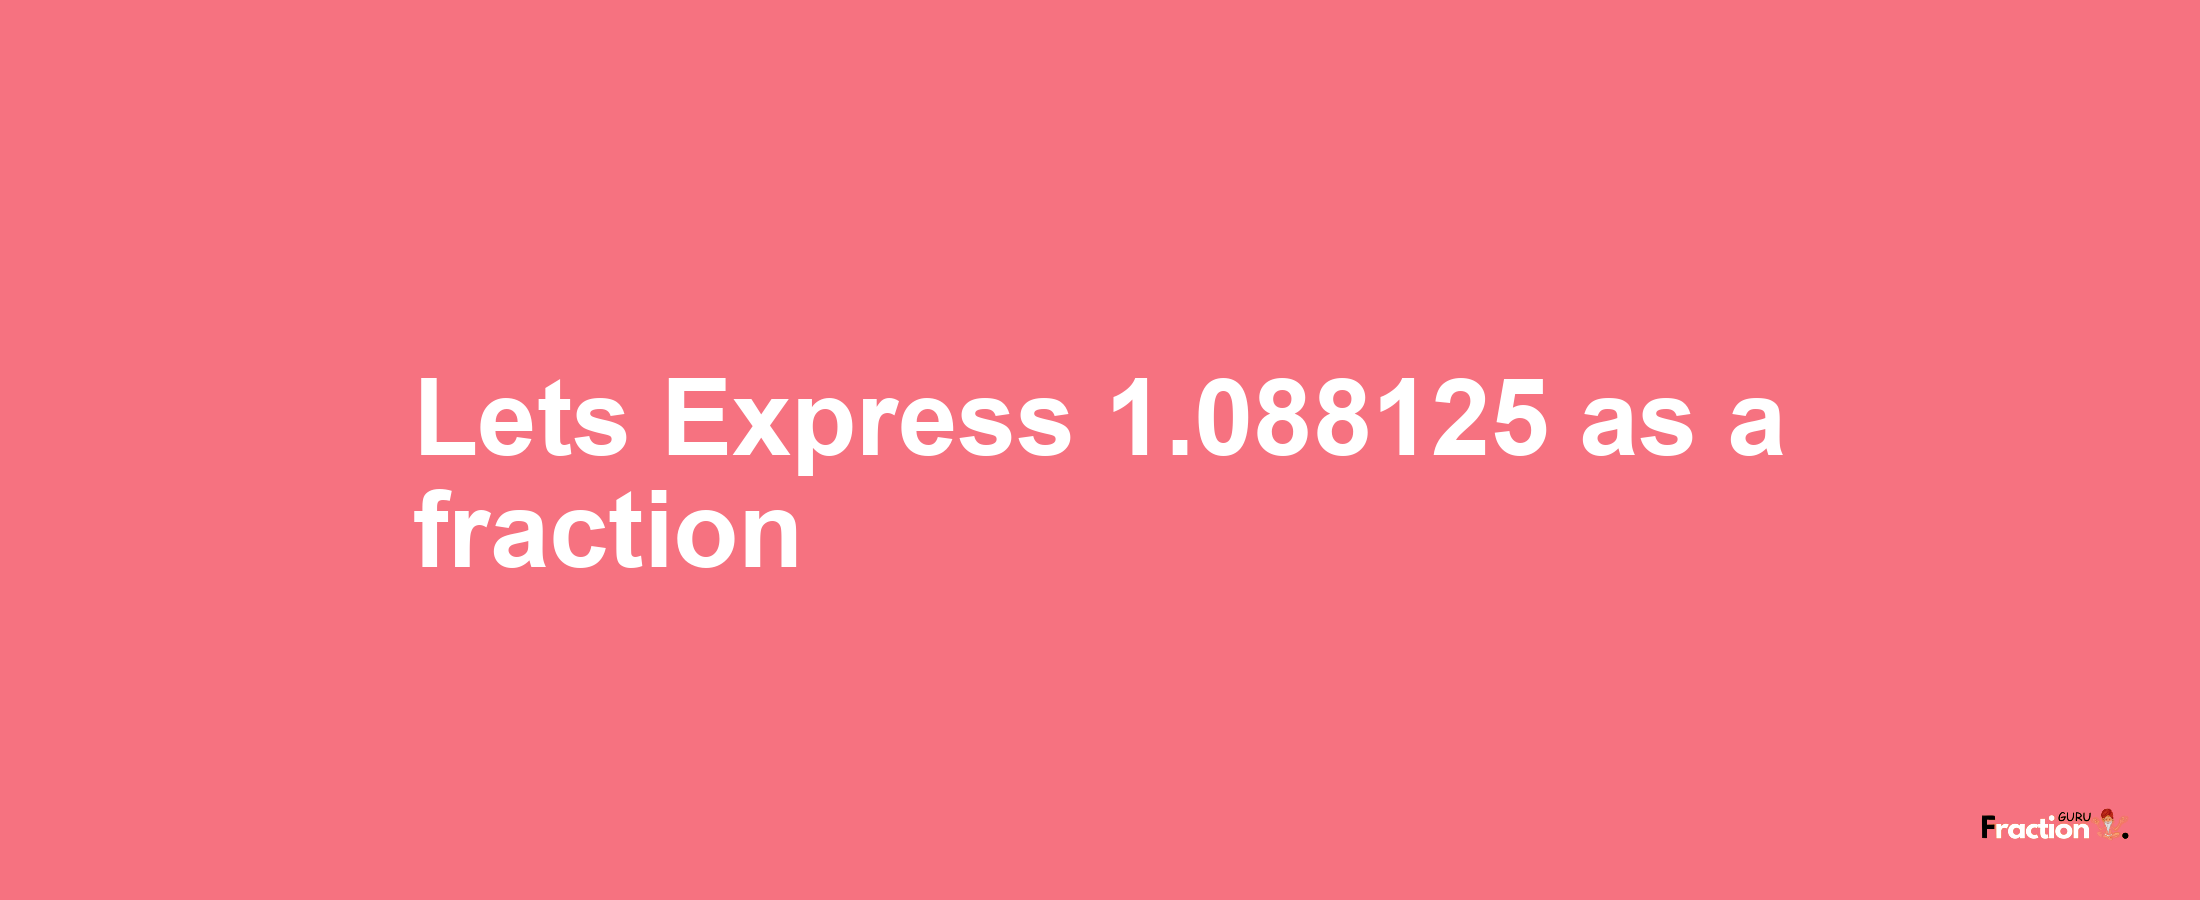 Lets Express 1.088125 as afraction